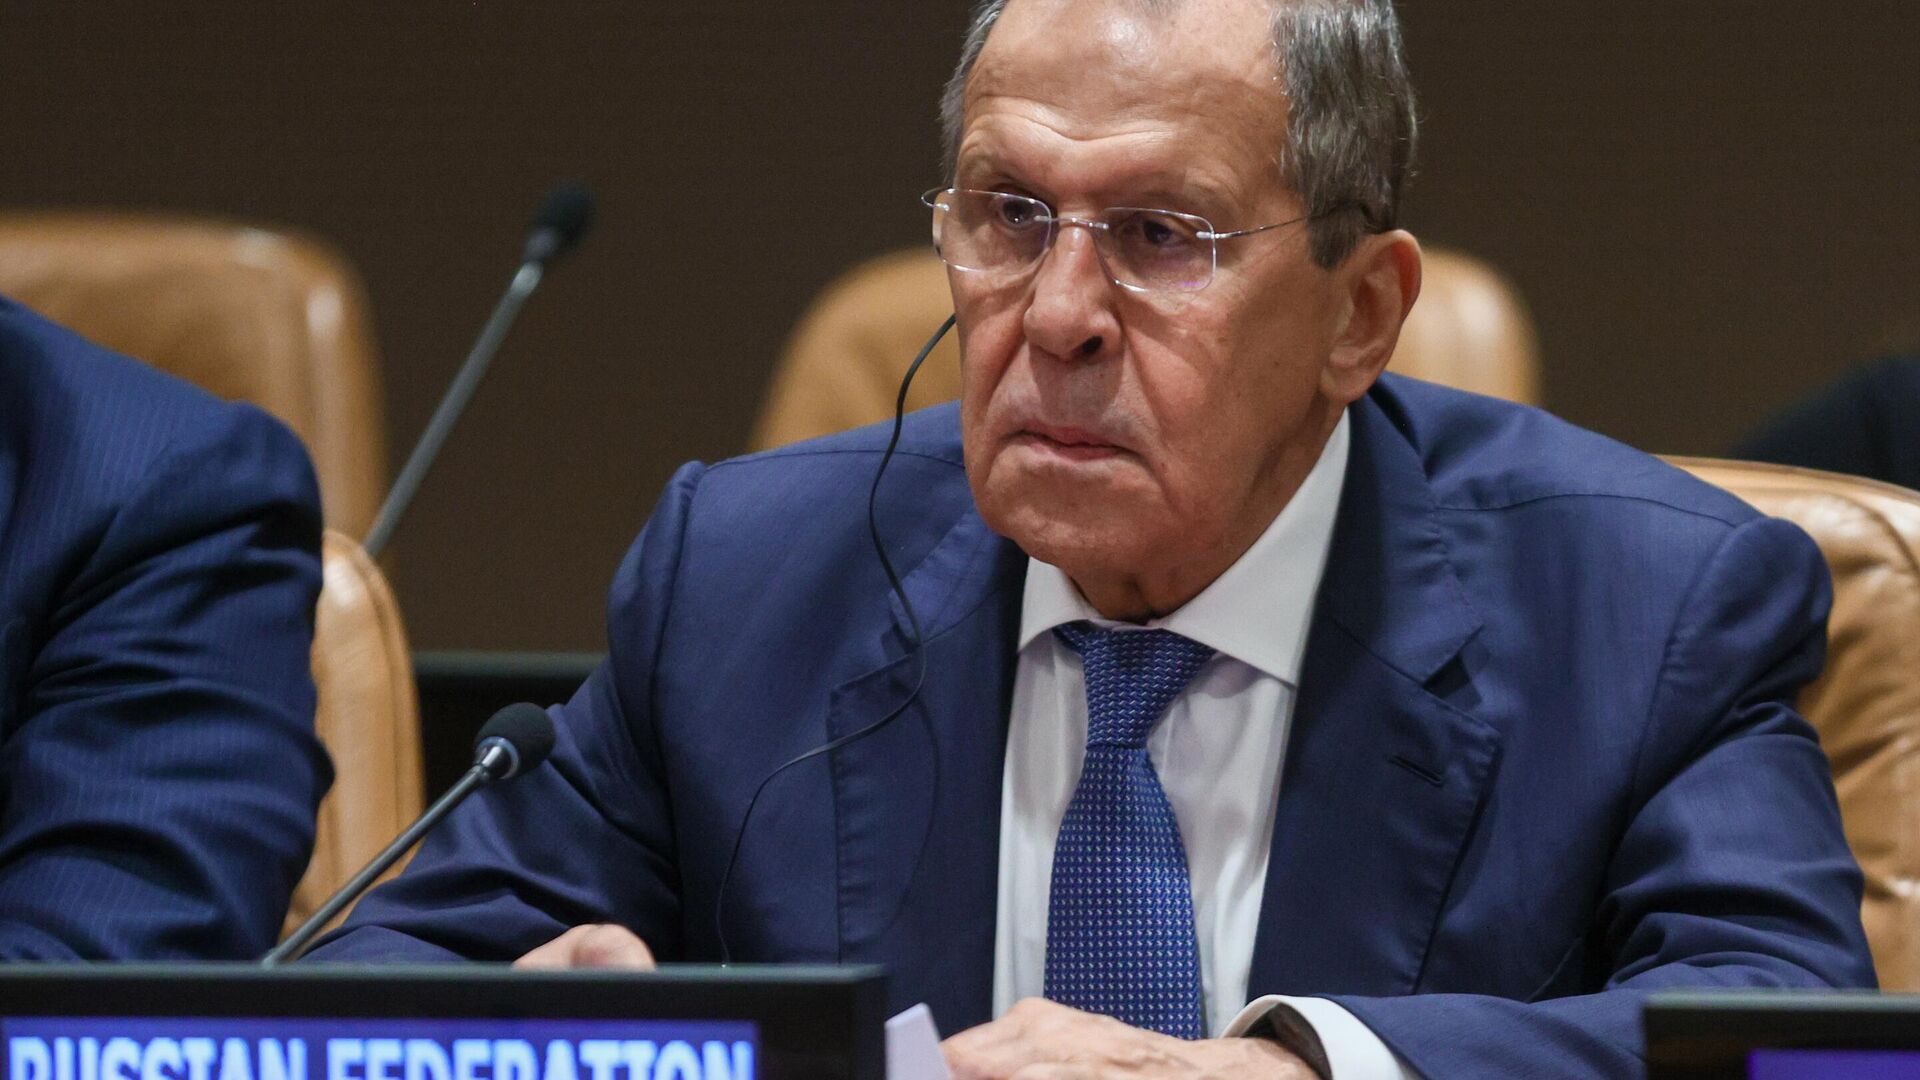 Russian Foreign Minister Sergei Lavrov during a meeting with his Chinese counterpart during the 77th session of the United Nations General Assembly in New York. - Sputnik International, 1920, 22.09.2022